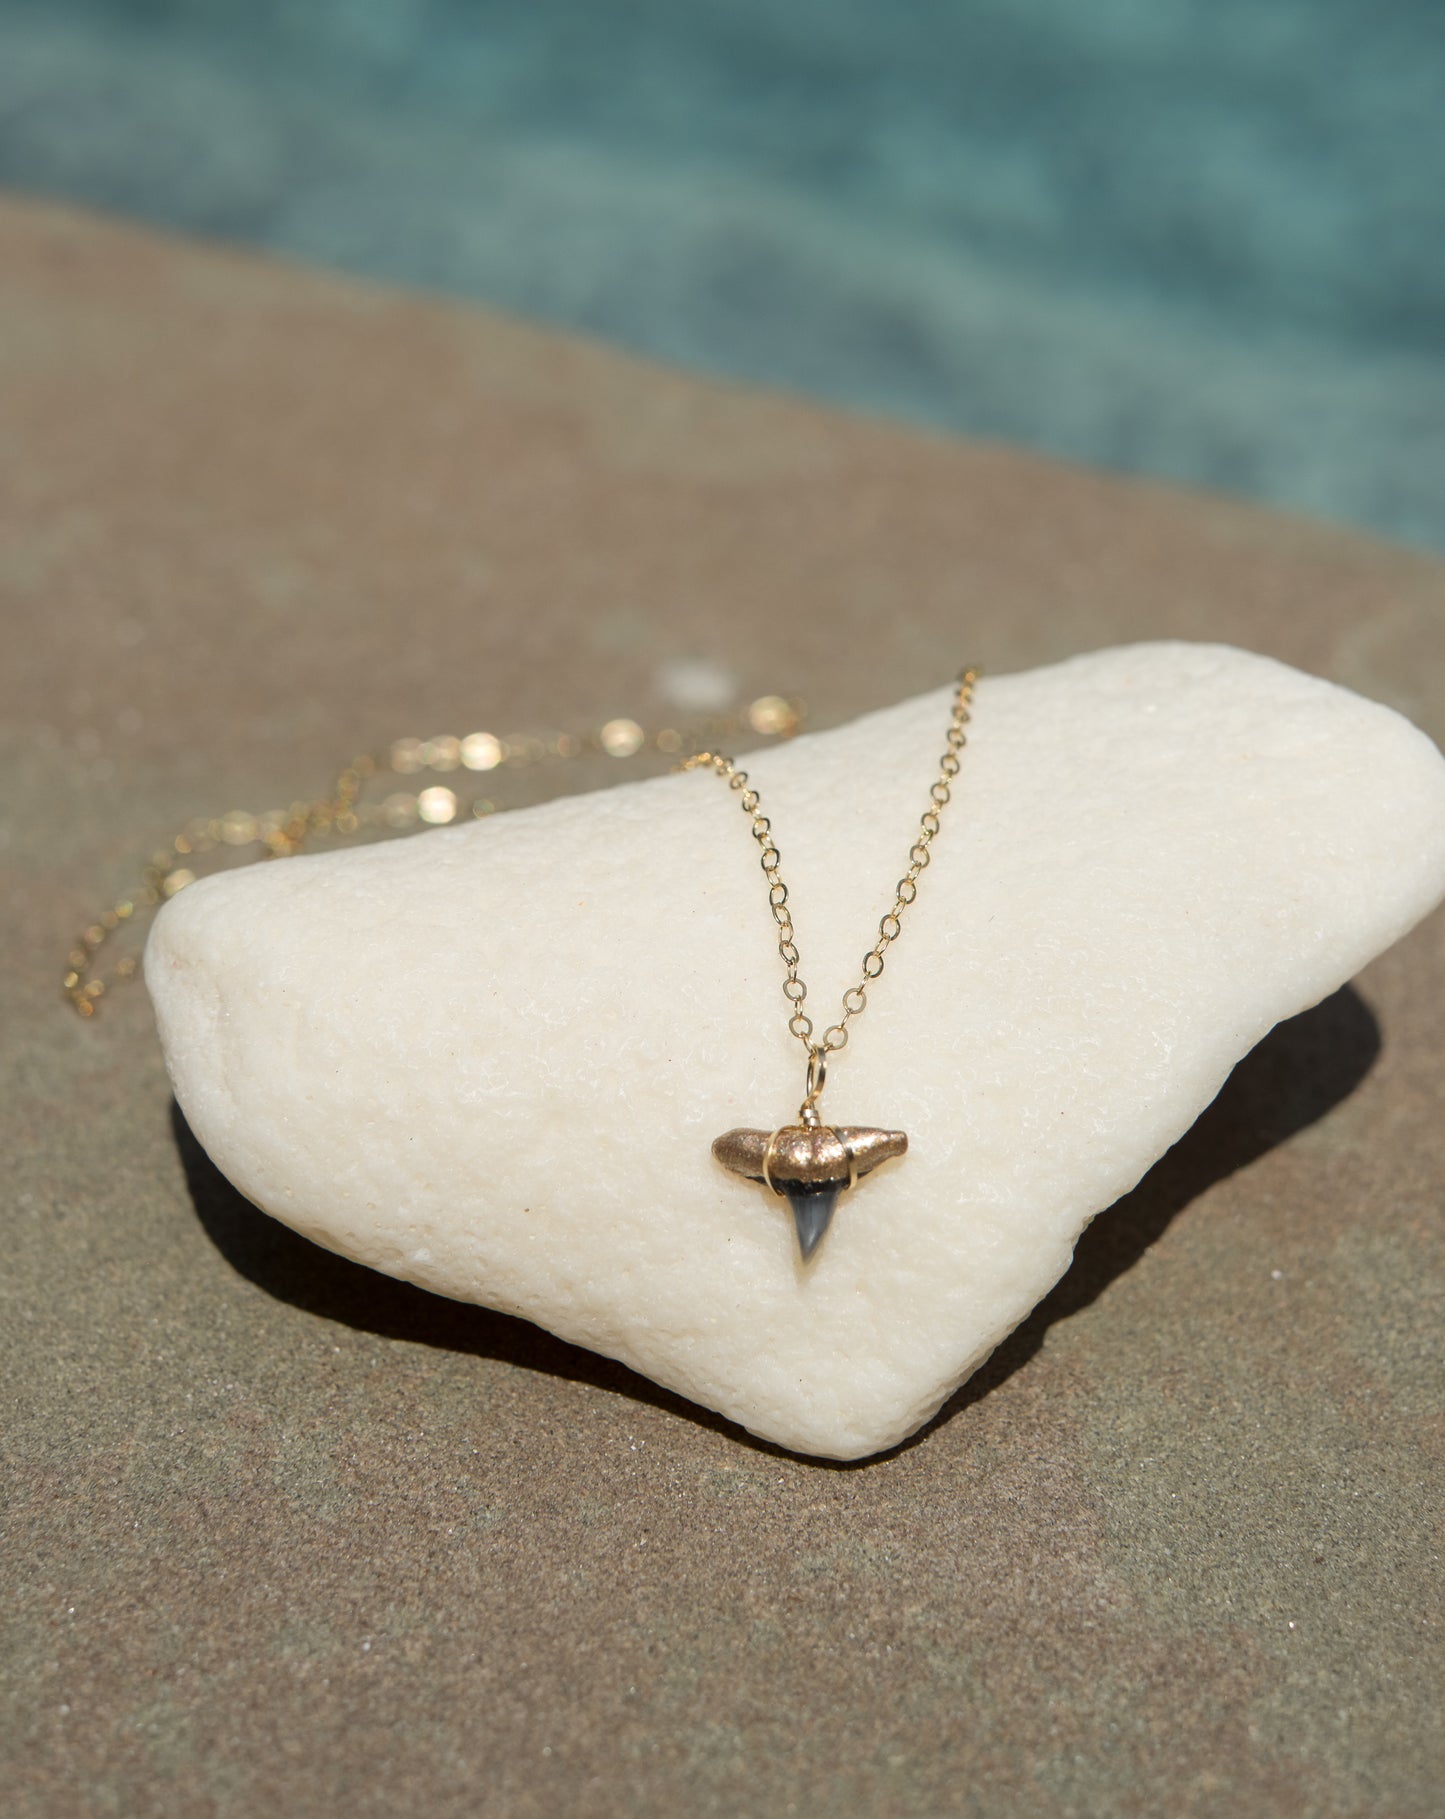 Gold-Tip Shark Tooth Necklace real shark tooth necklace gold tip shark tooth pendant real fossil jewelry - Foxy Fossils